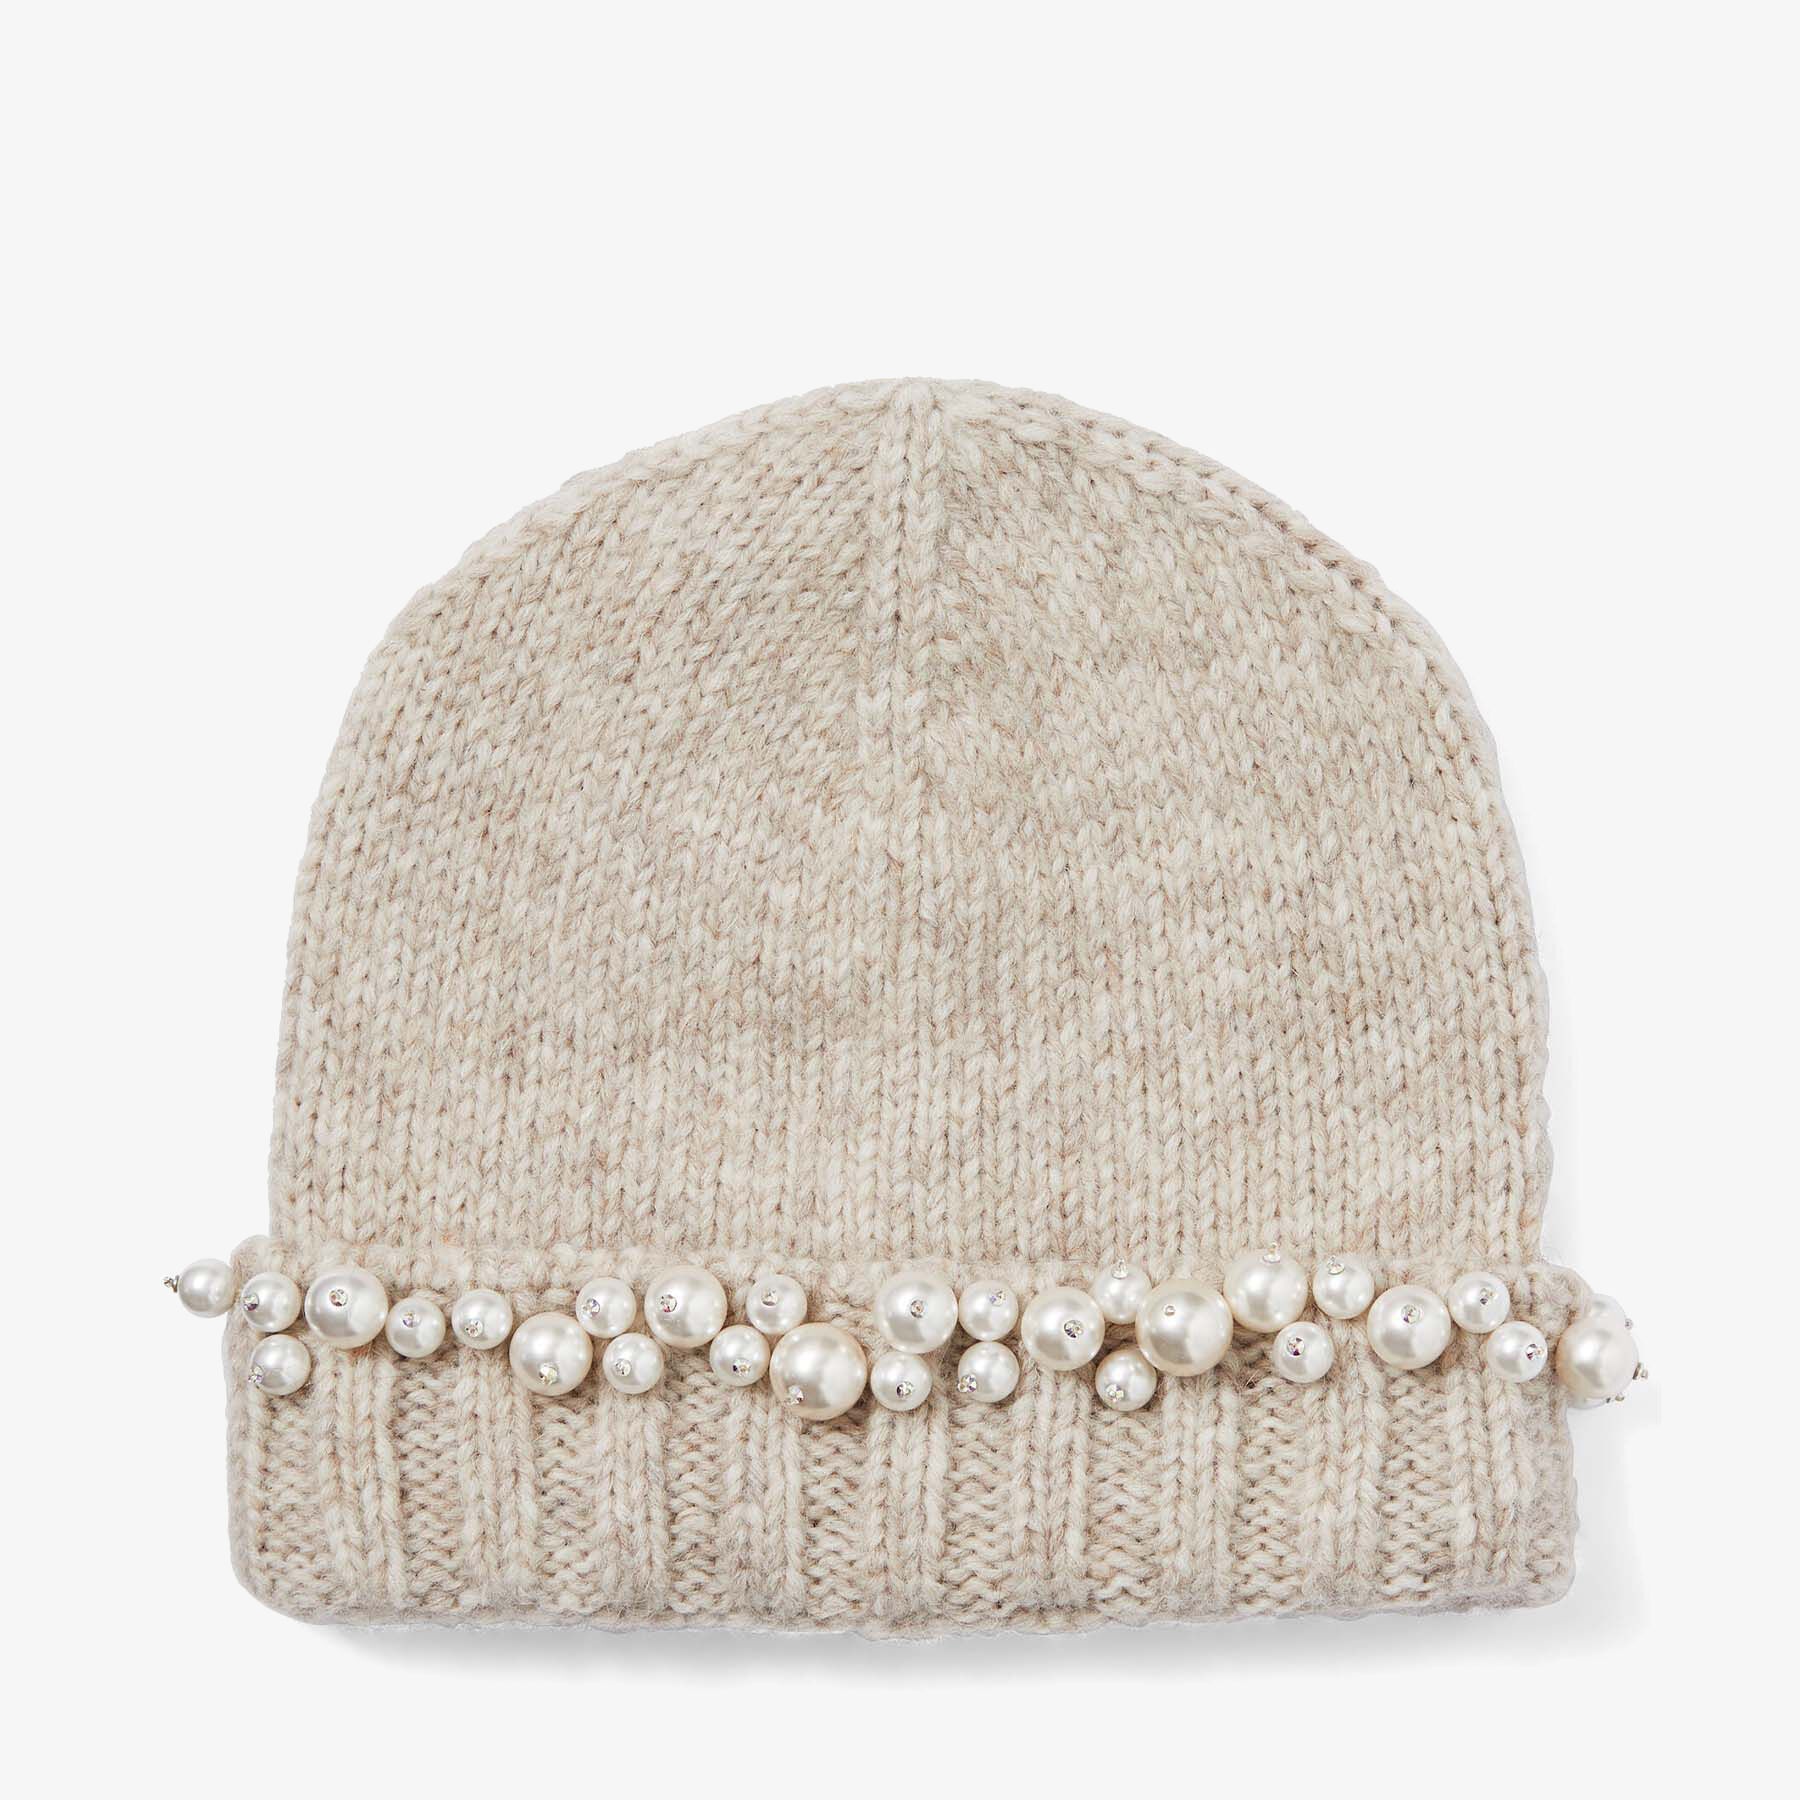 Gerry
Marl Grey Knitted Wool Blend Hat with Pearls - 1